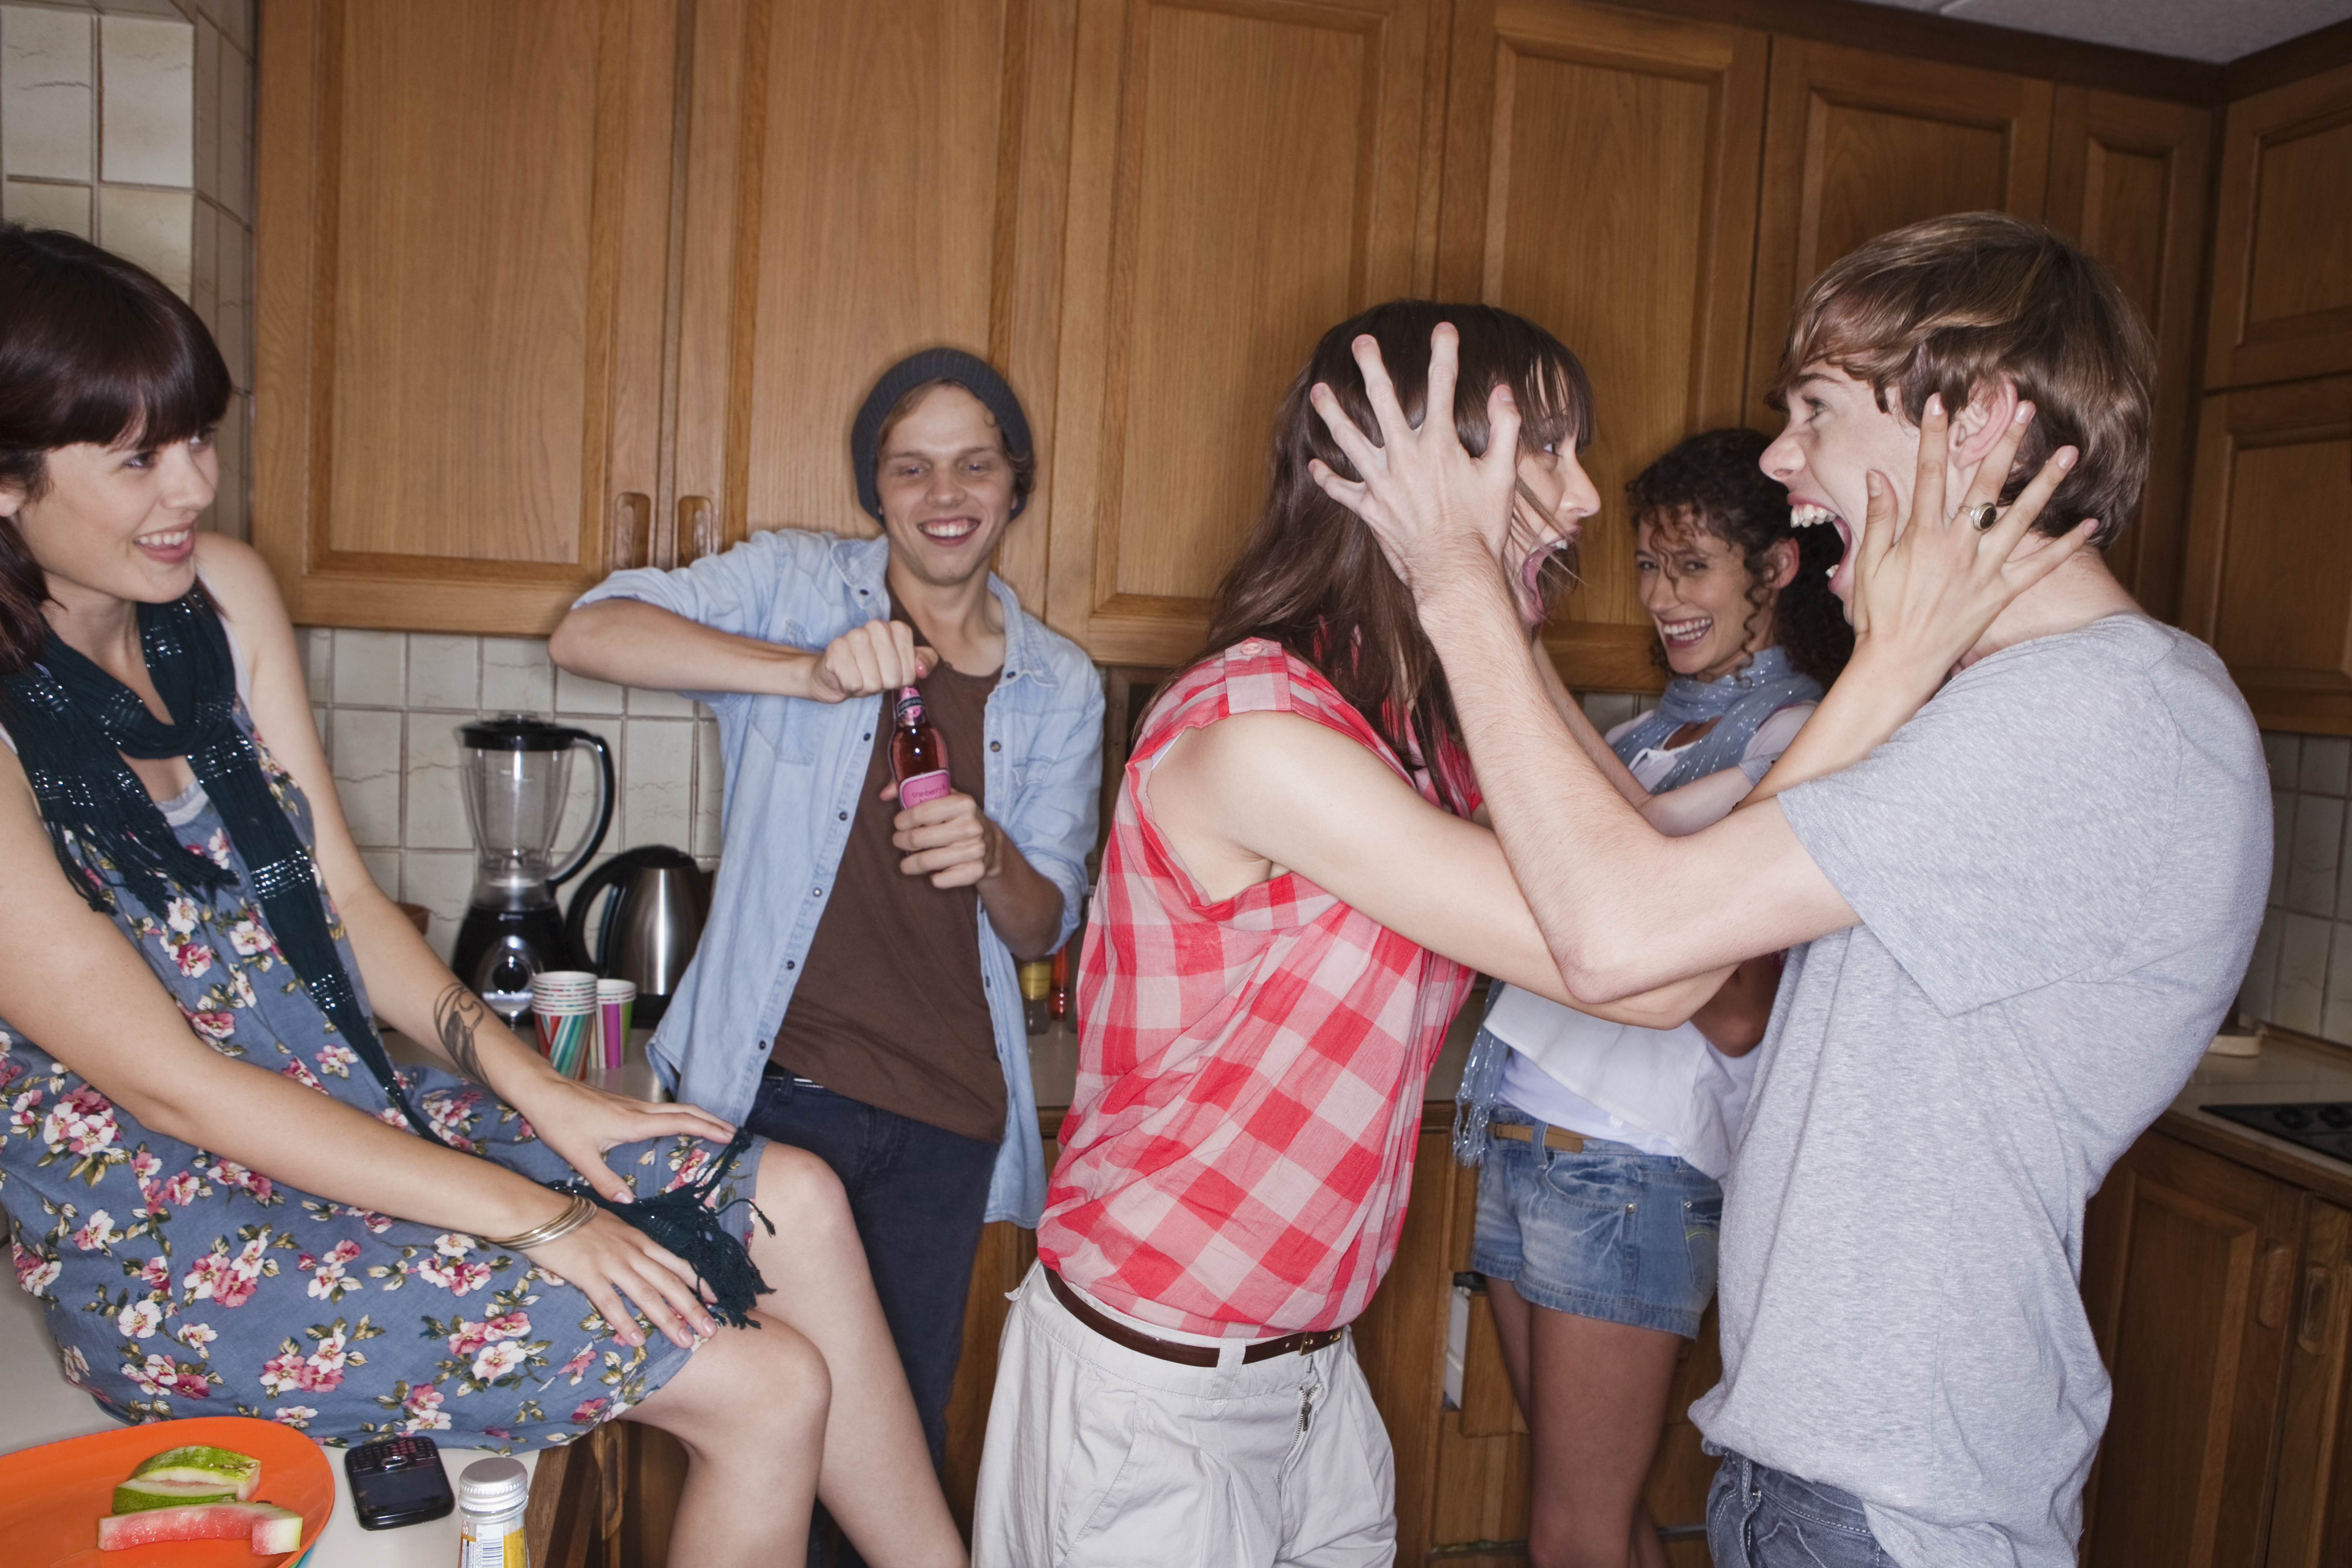 Teens shouting in kitchen | Source: Getty Images